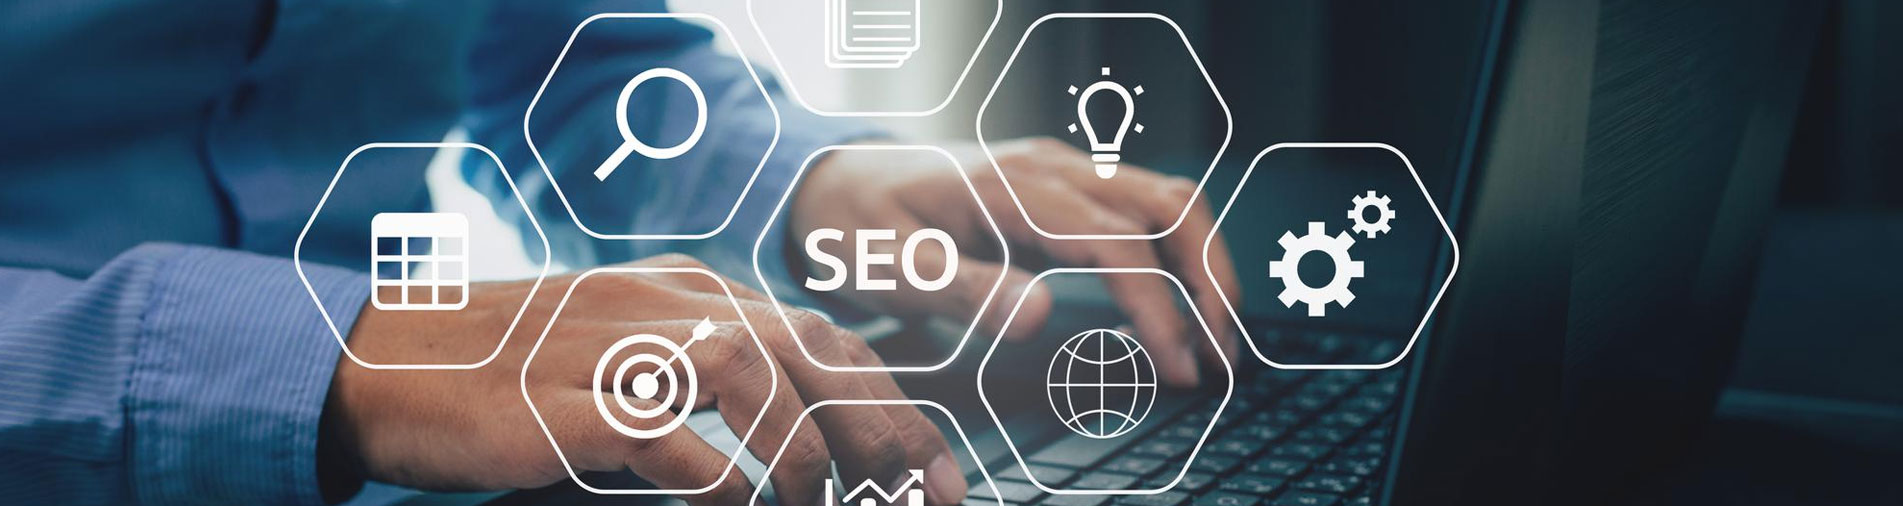 Is Keyword Research Relevant In 2022 – An SEO Company Weighs In